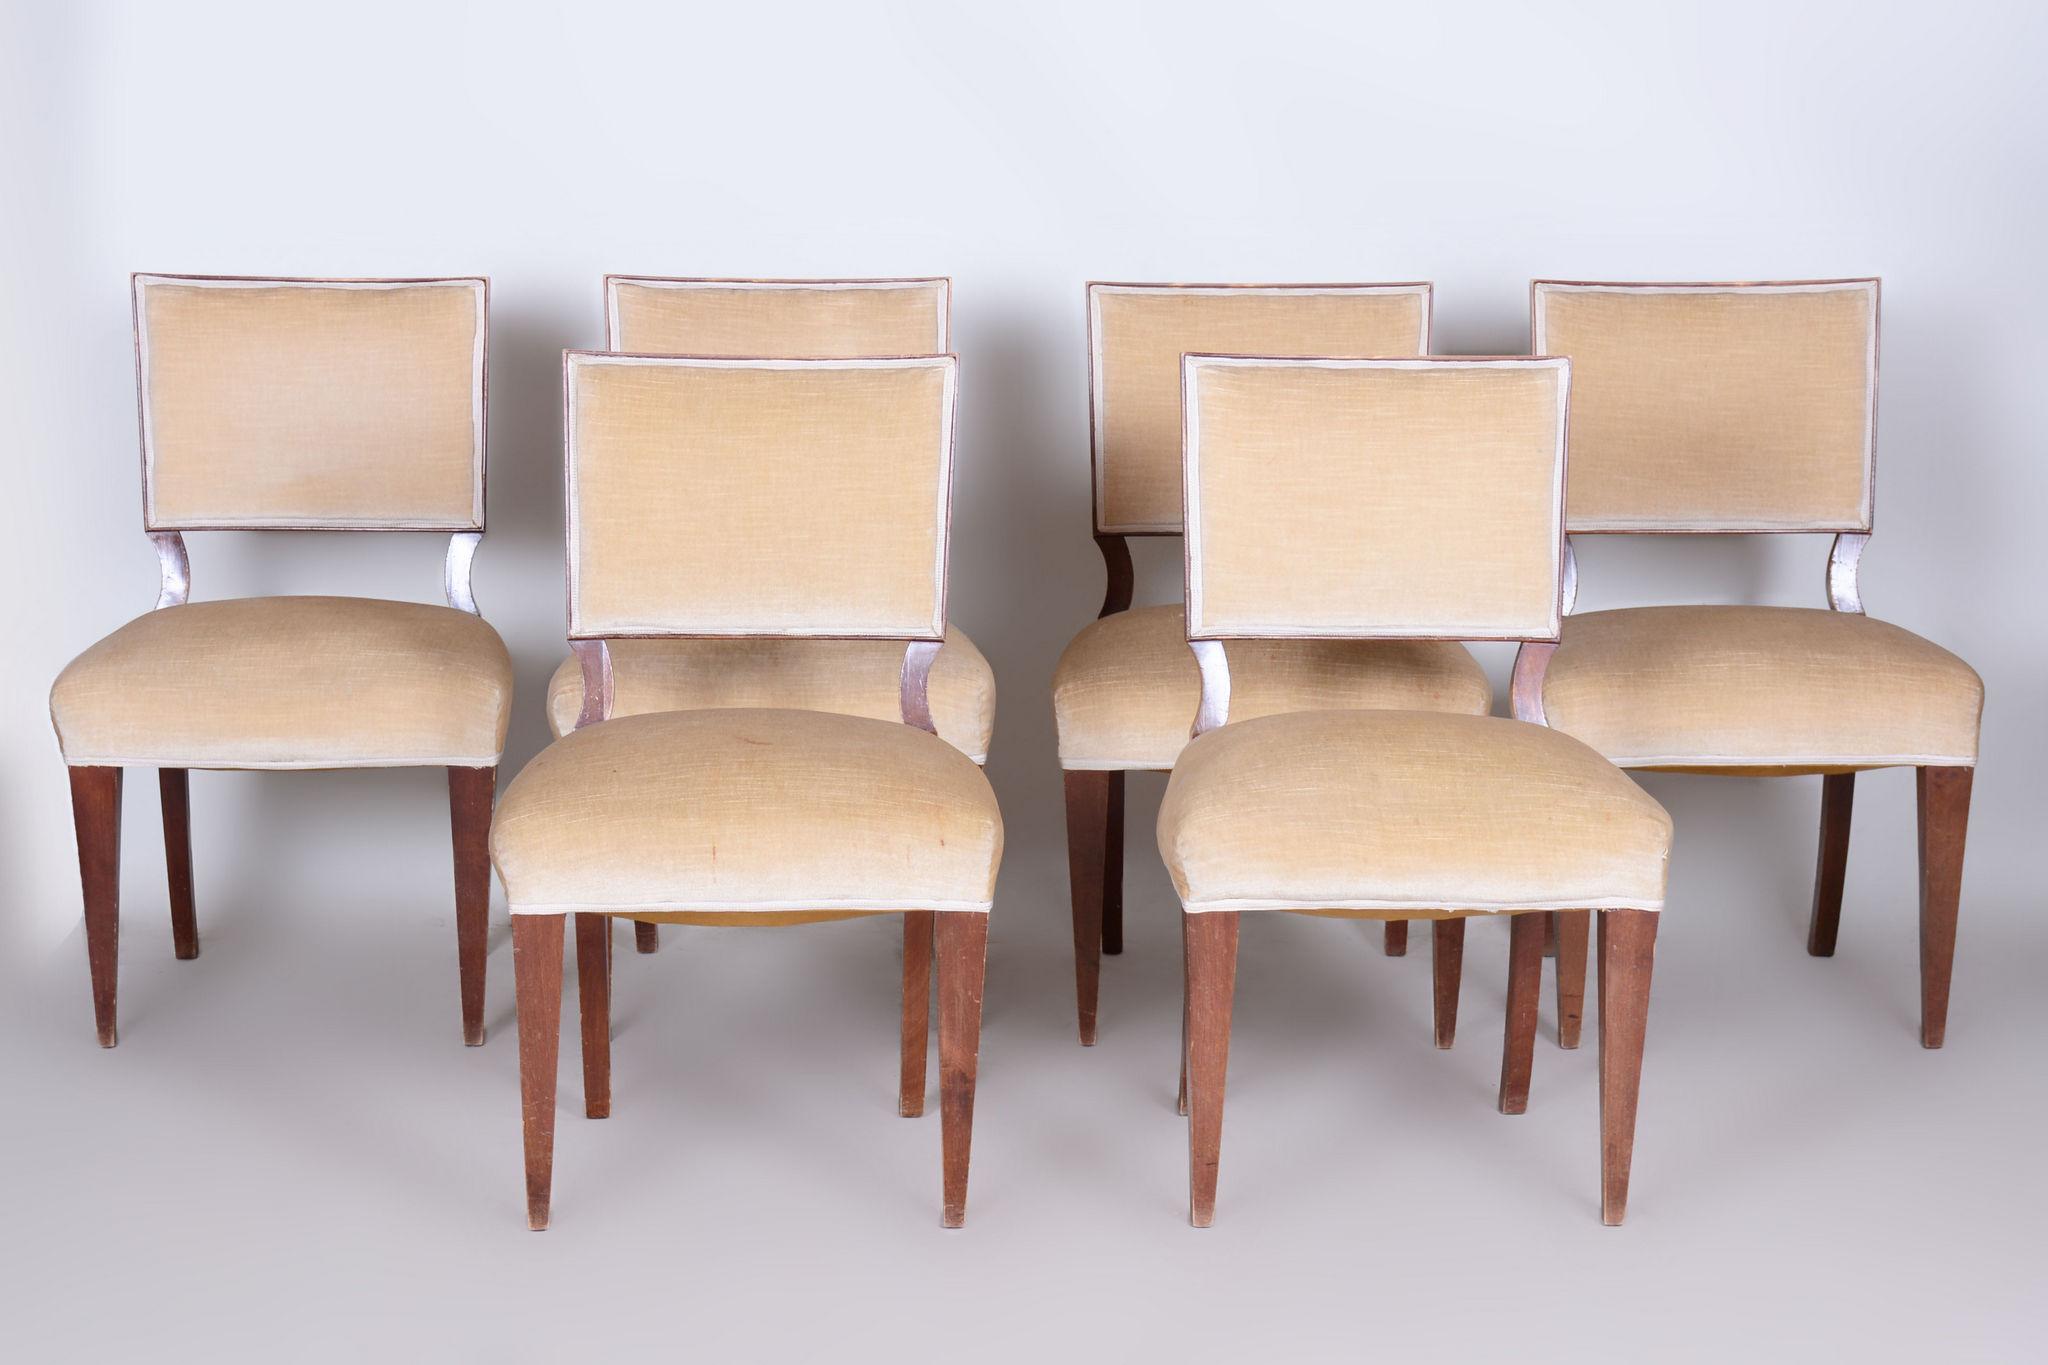 Six Art Deco chairs

Origin: France 
Period: 1920-1929
Material: Walnut, upholstery

In pristine original condition, the upholstery has been professionally cleaned, and its polish revived by our refurbishing team in Czechia. 							

It has been